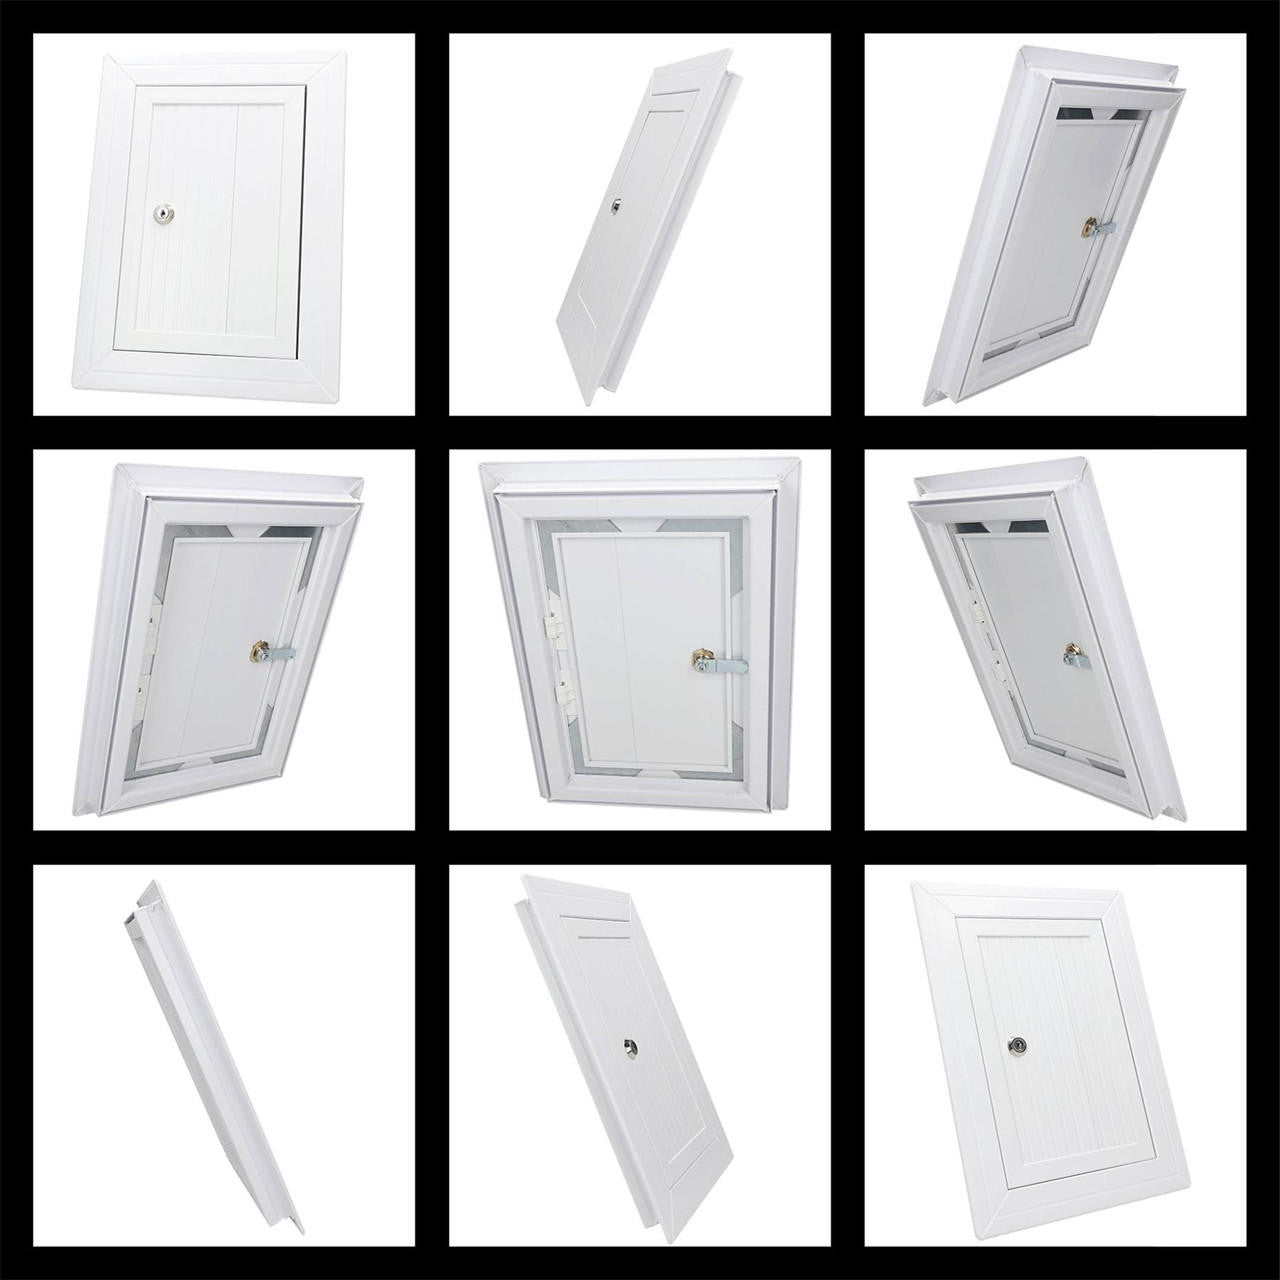 Awenta White PVC Chamber Cover Inspection Hatch Door Access Panel Grille with Key Lock 